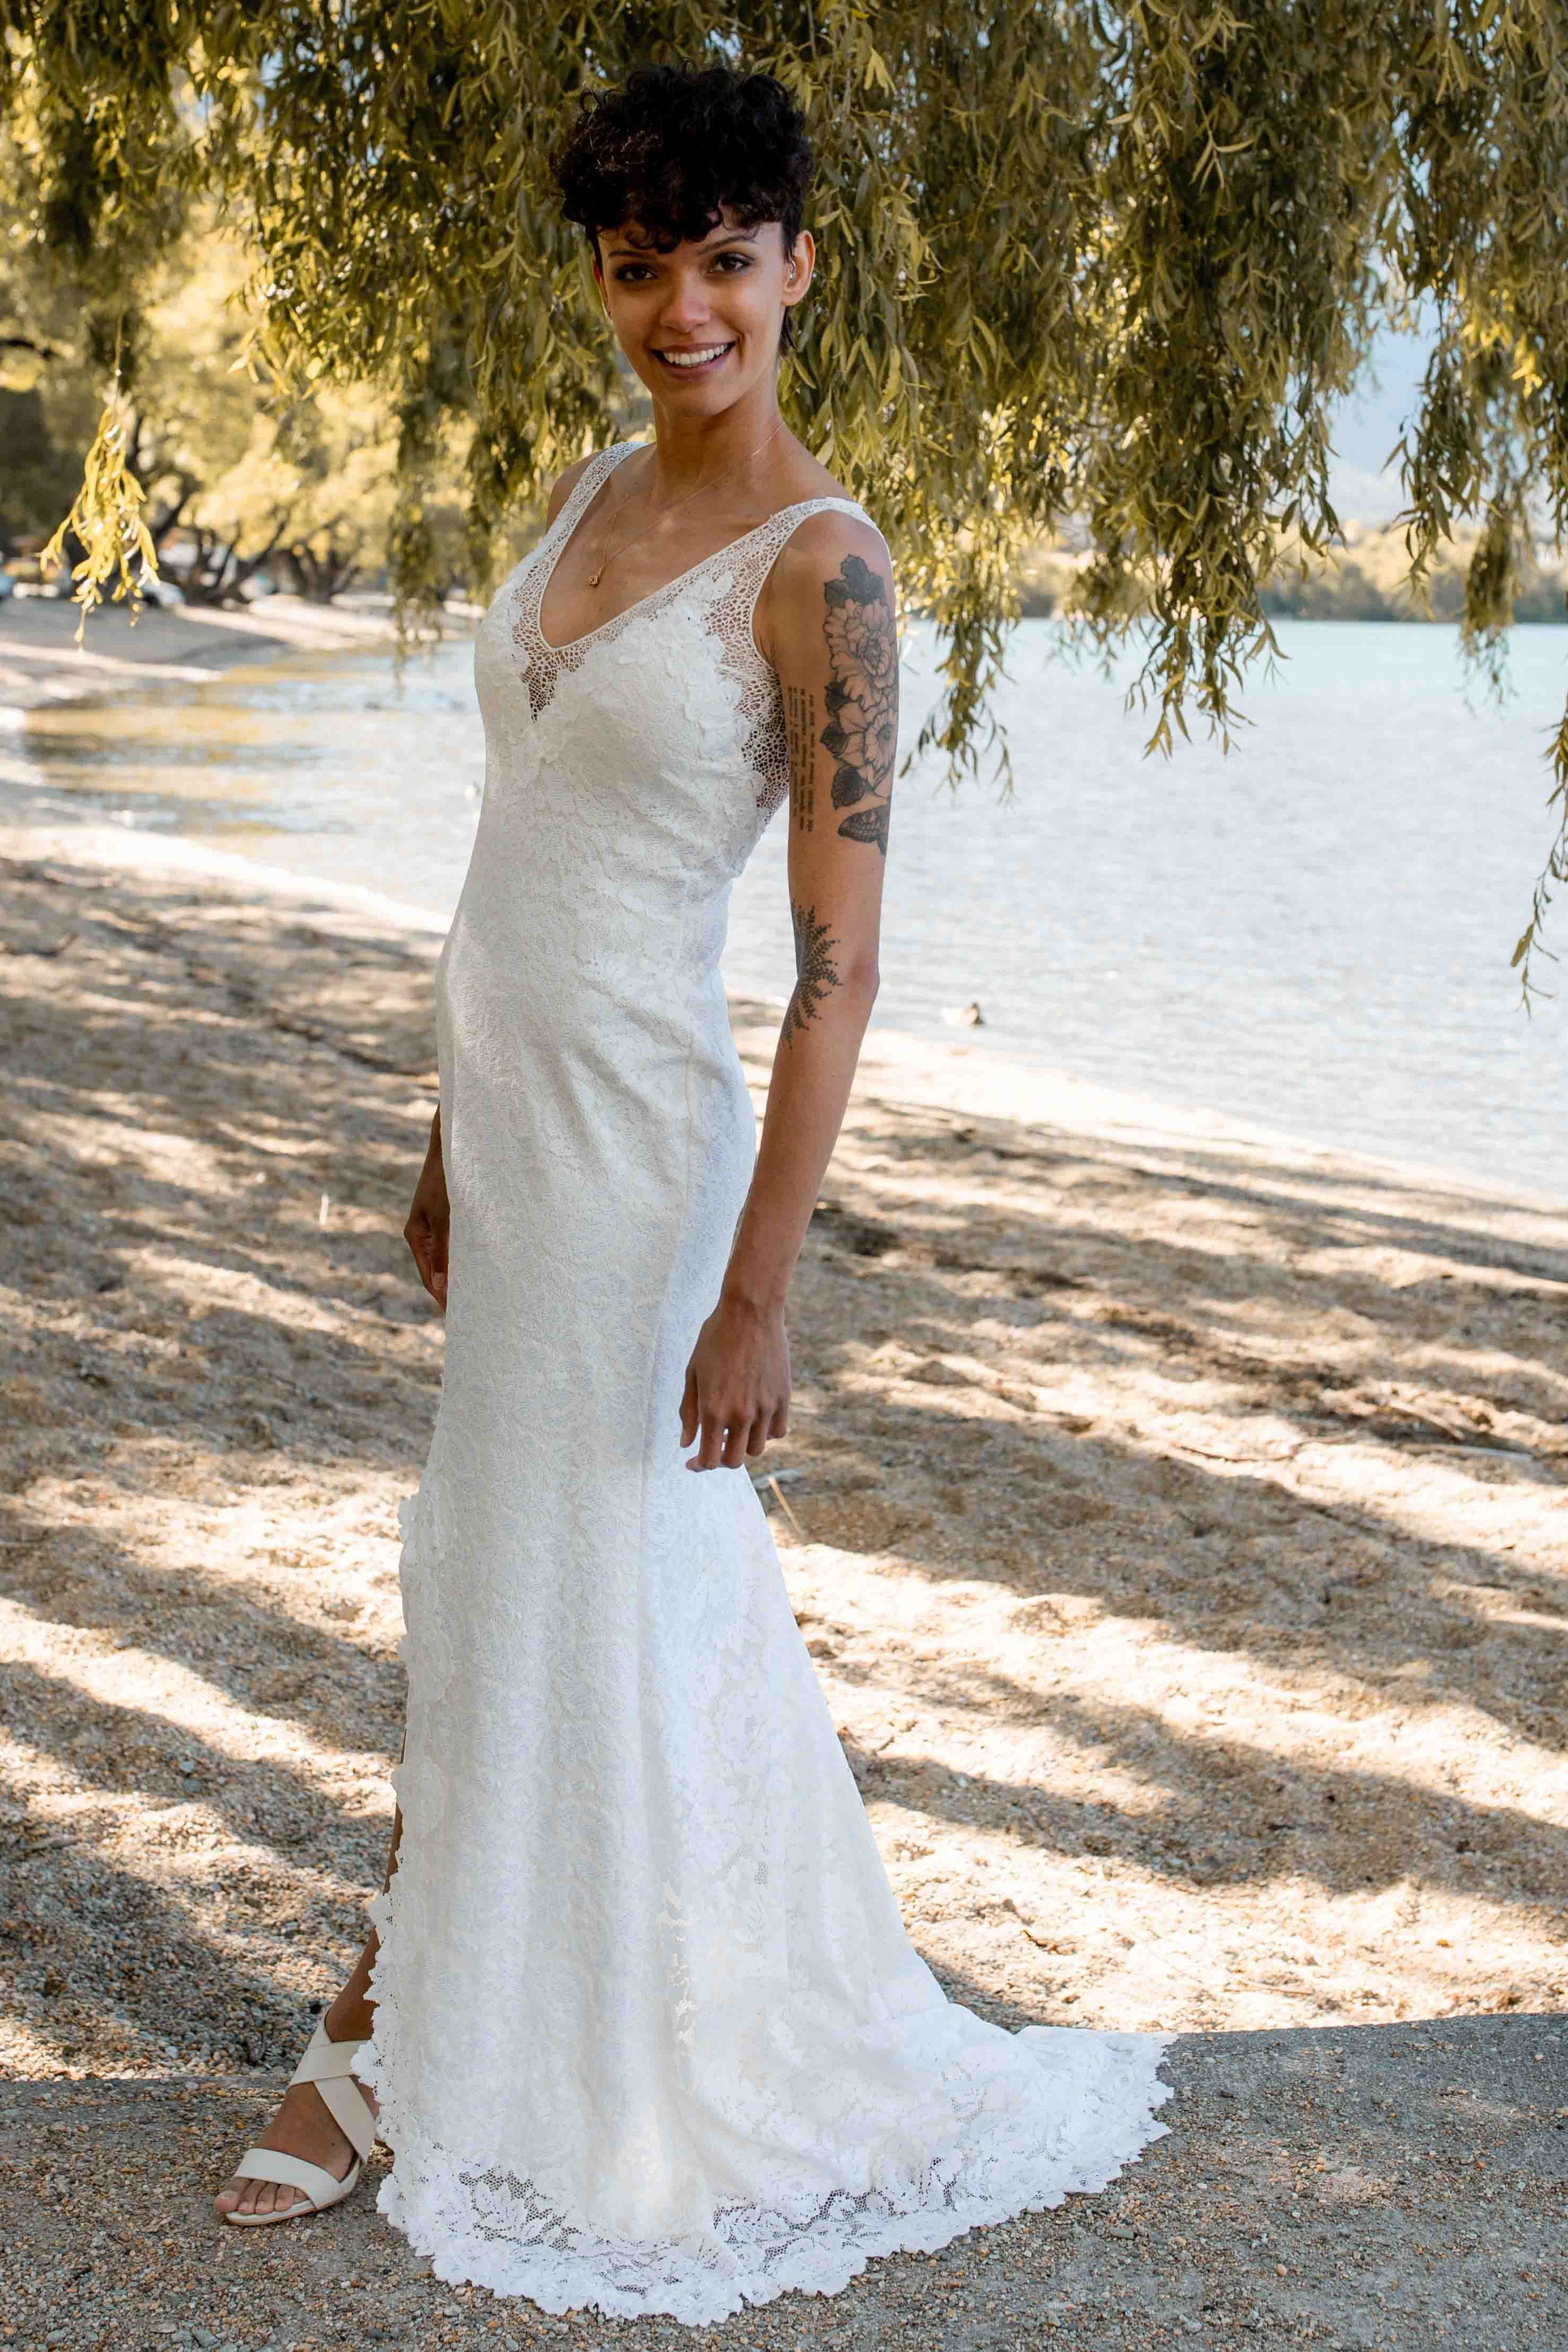 Kate Dress - Nemo Bridal Couture Queenstown New Zealand 0V9A2449.jpg